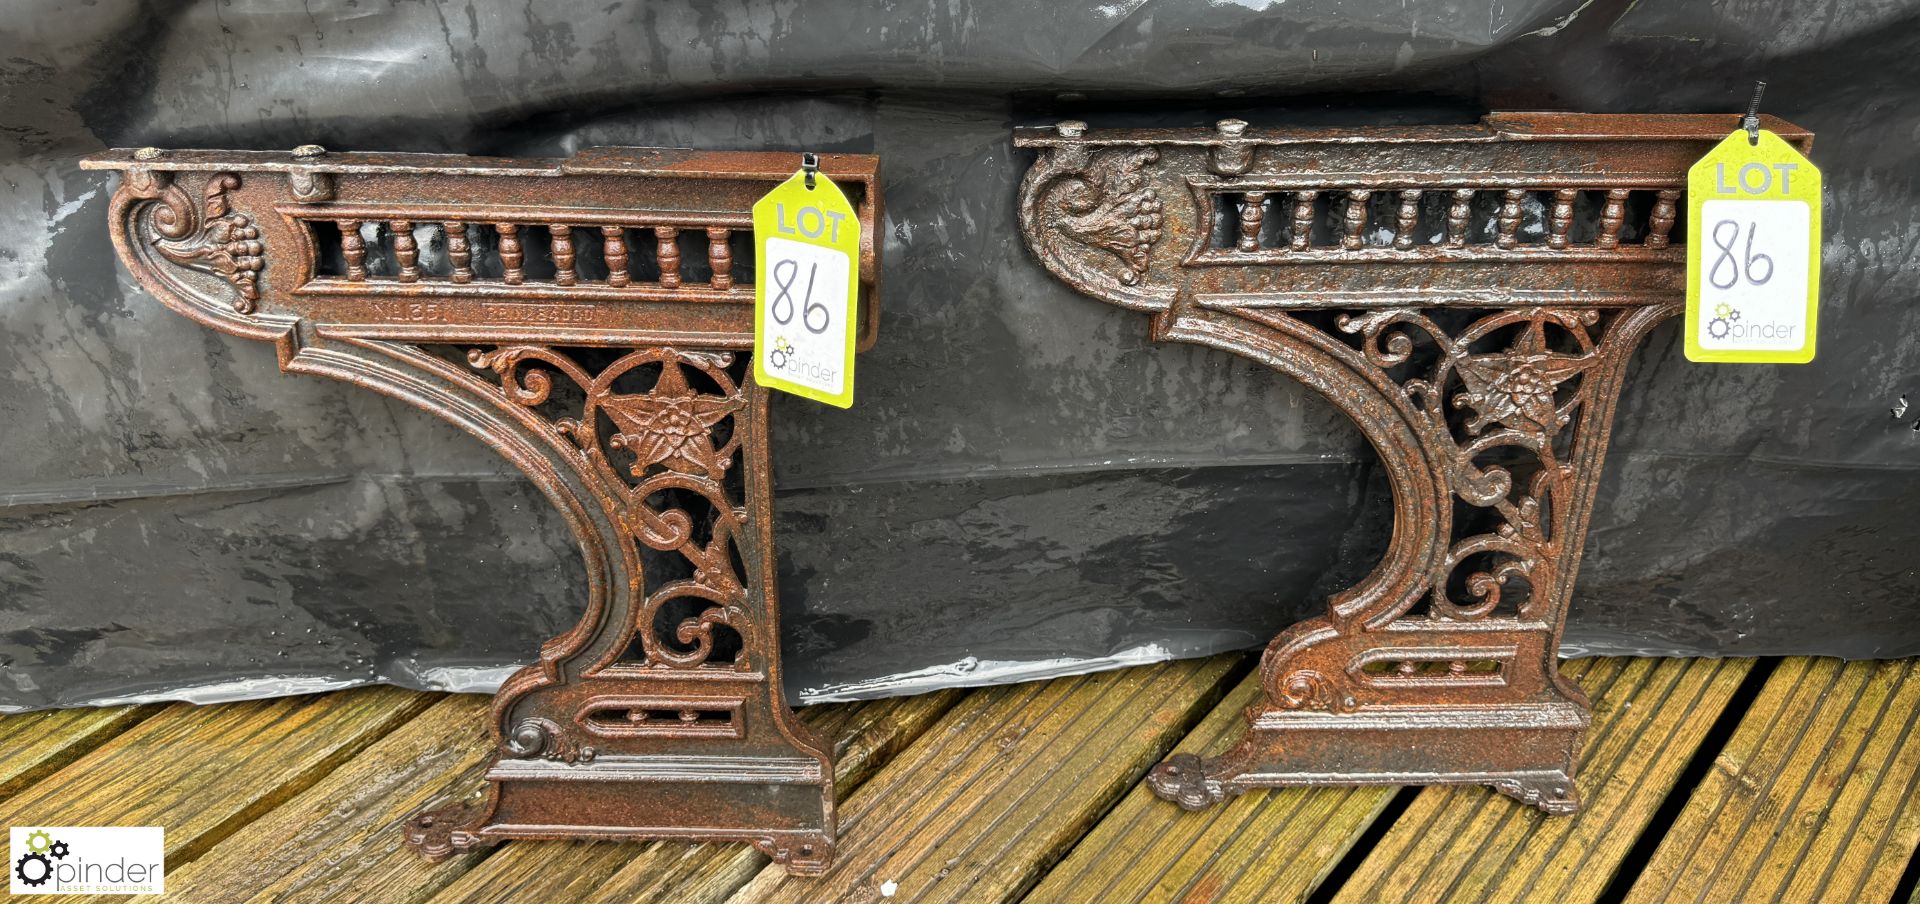 A pair cast iron Bench Brackets, with RD identification number “N84000 model no 1351”, approx.